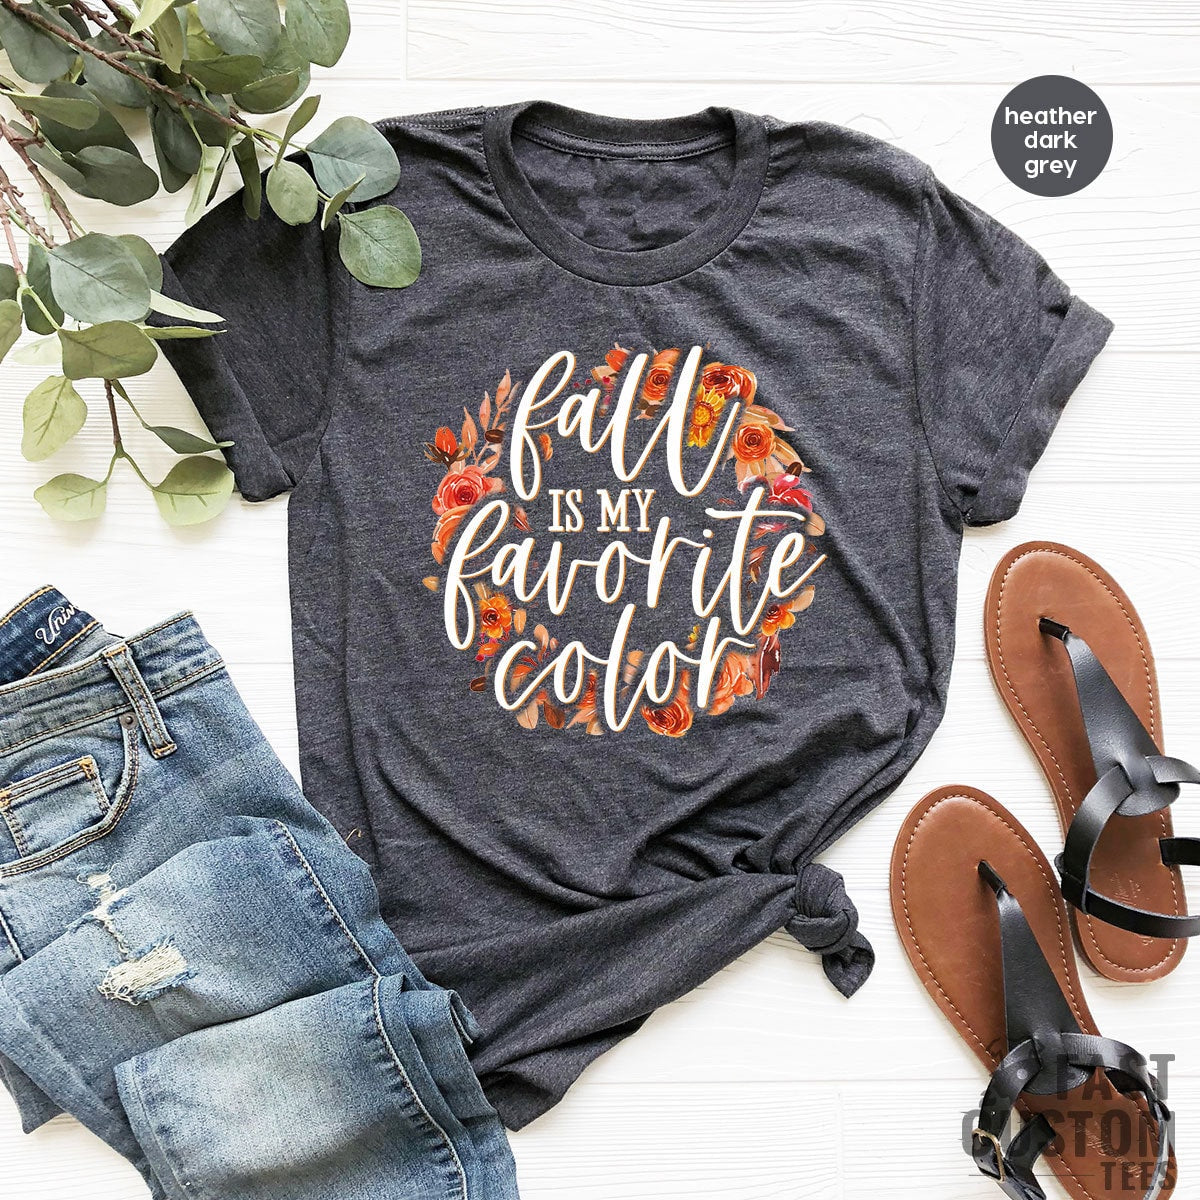 funny t-shirts for teens + other hard to shop for people - It's Always  Autumn